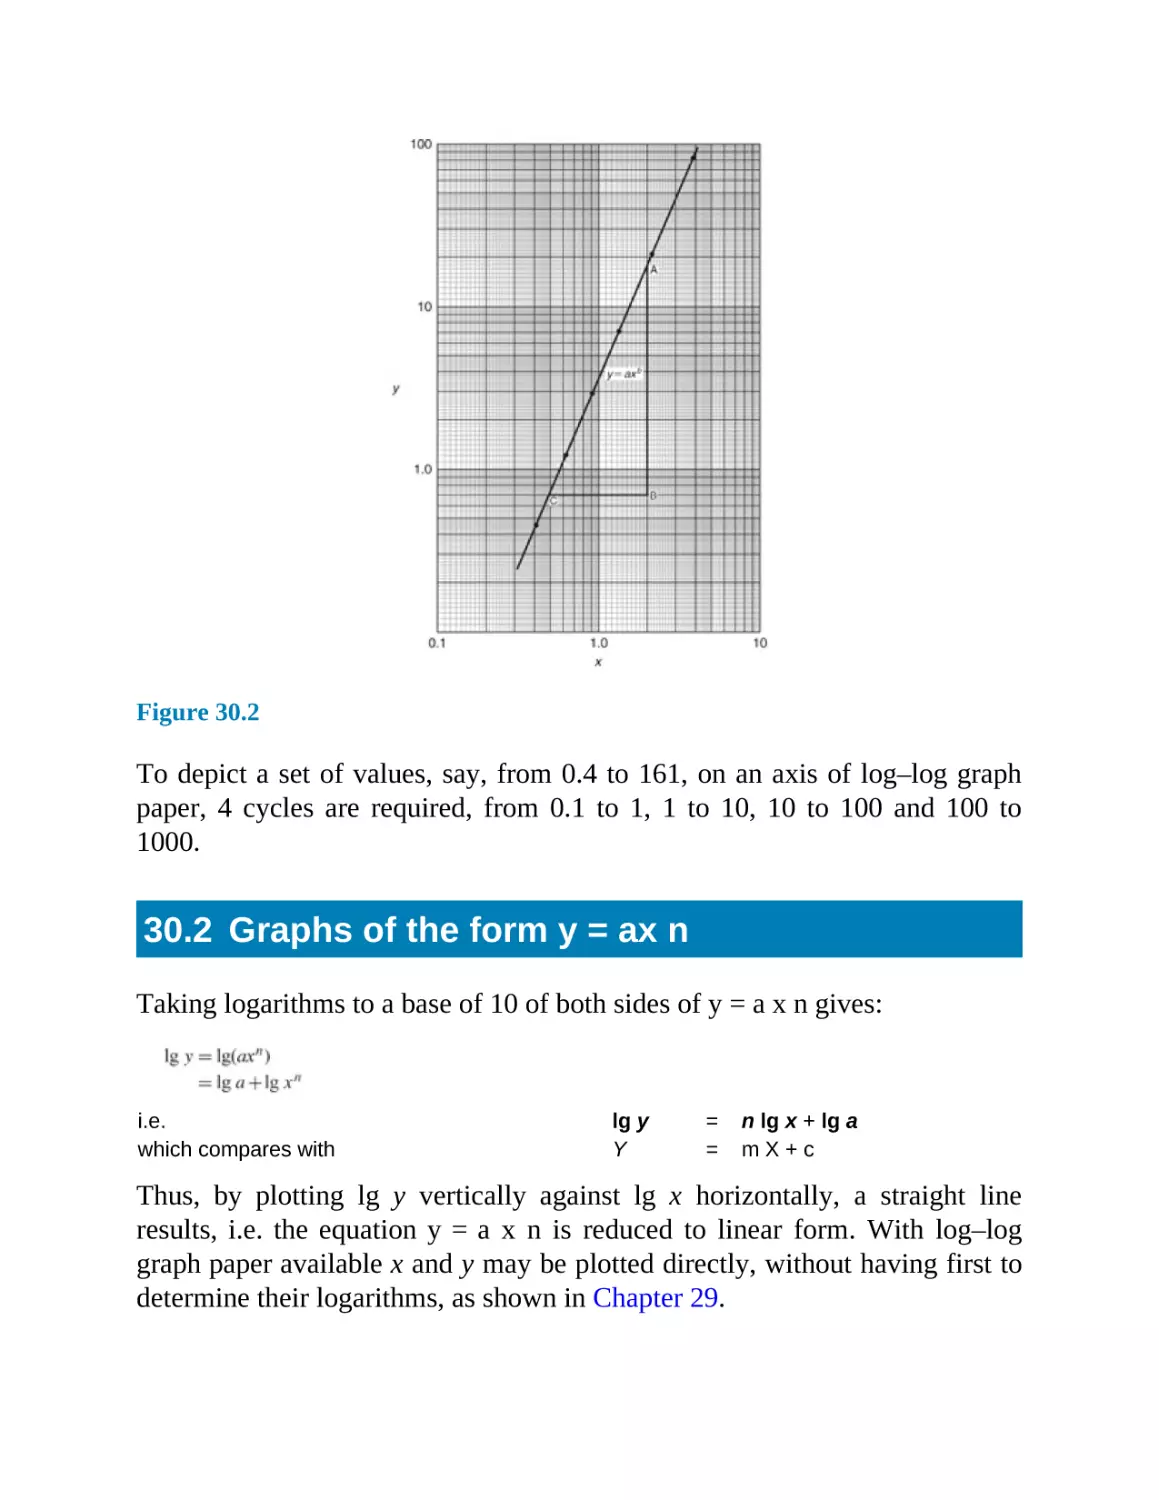 30.2 Graphs of the form y